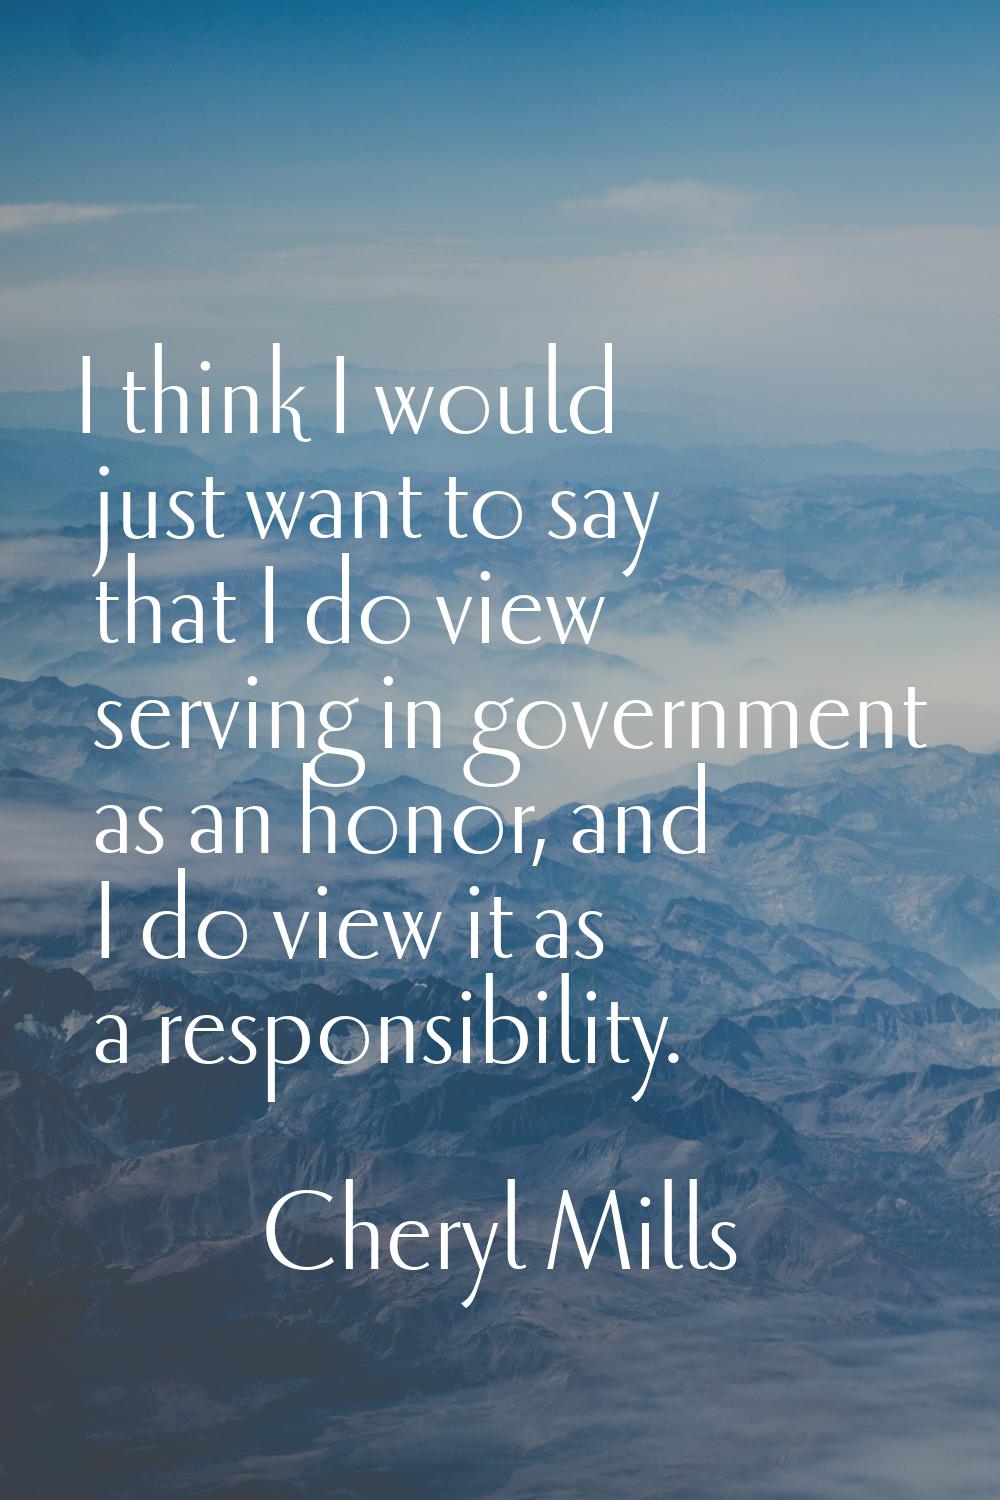 I think I would just want to say that I do view serving in government as an honor, and I do view it